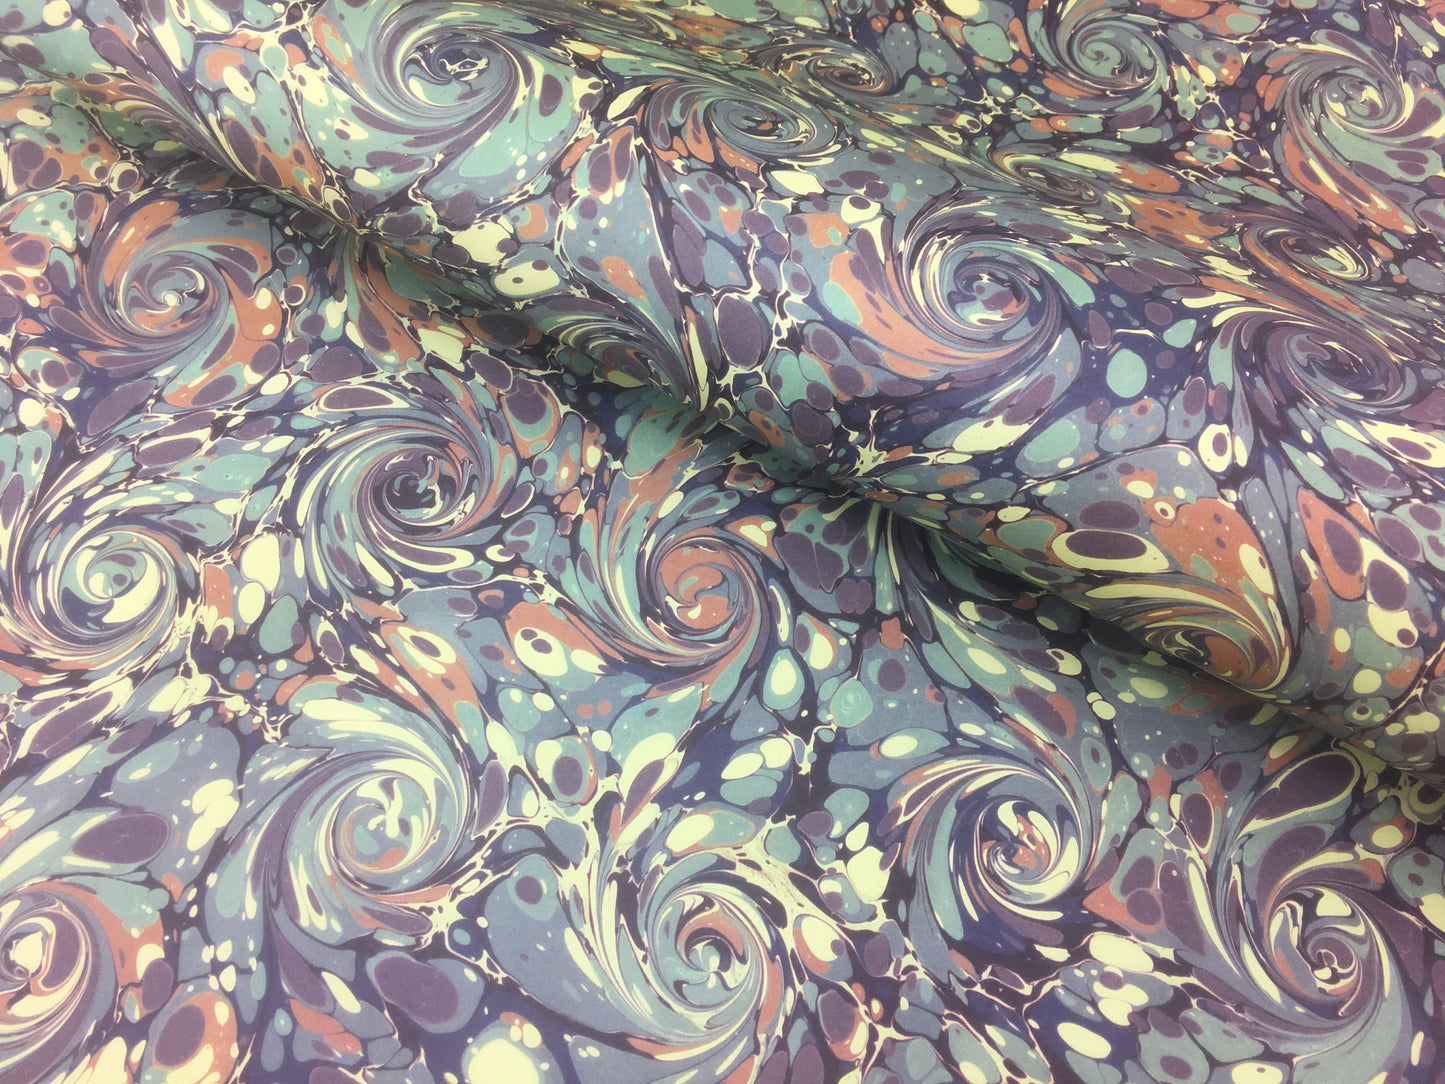 Printed marbled paper- HIGH DEFINITION-  THICK 100GSM ACID FREE PAPER- Suitable for book covers and end sheets- TBBPM17